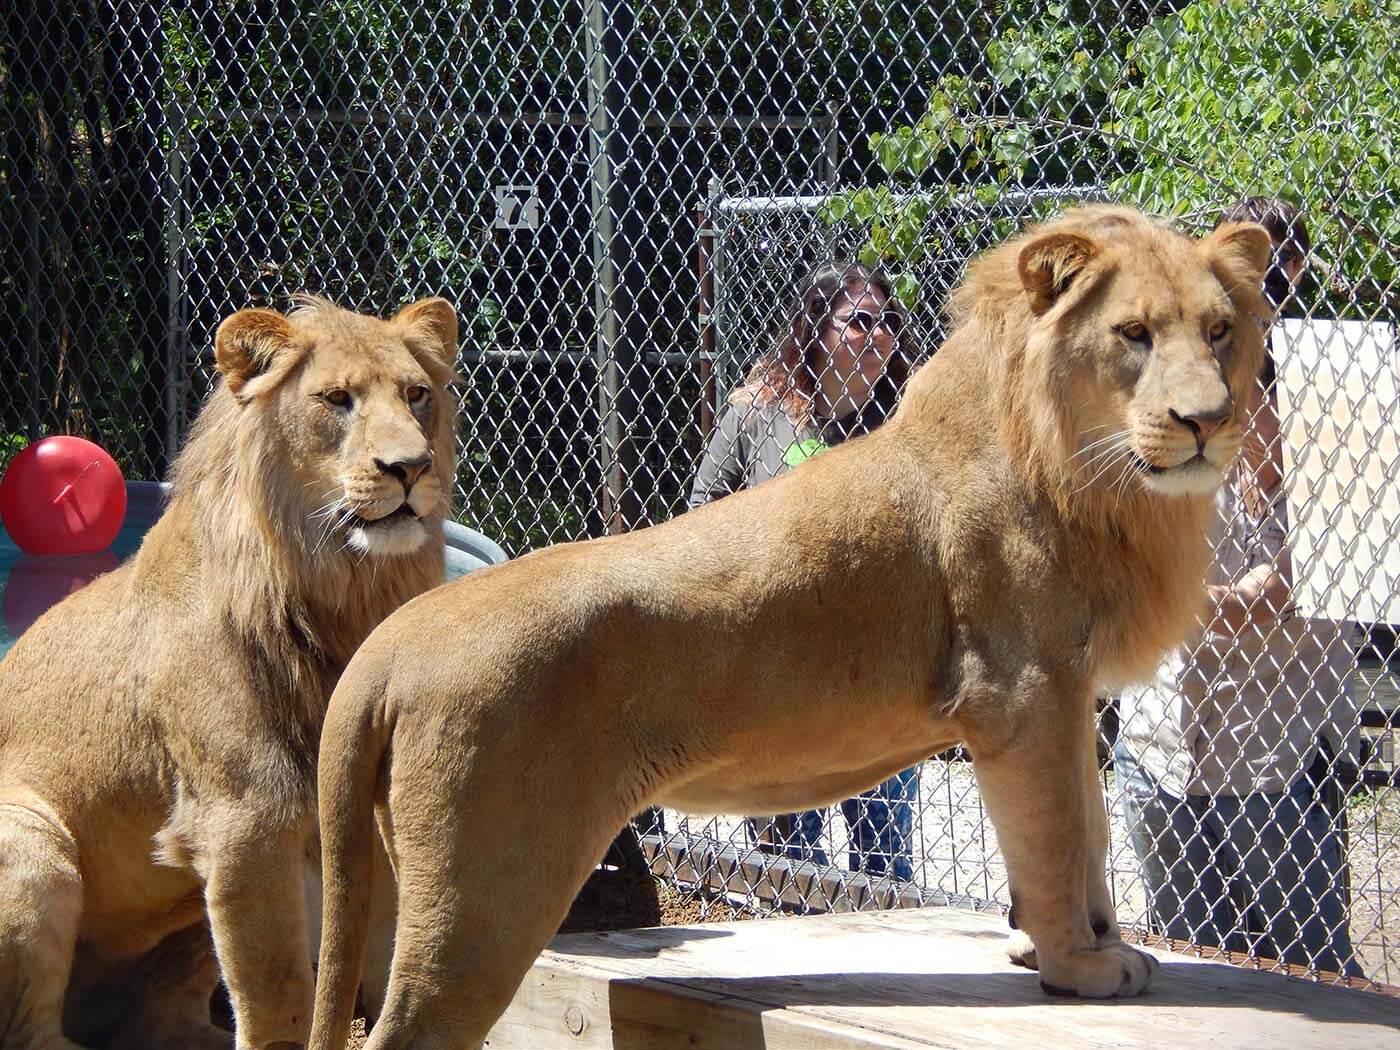 Two lions standing next to each other in a fenced enclosure.